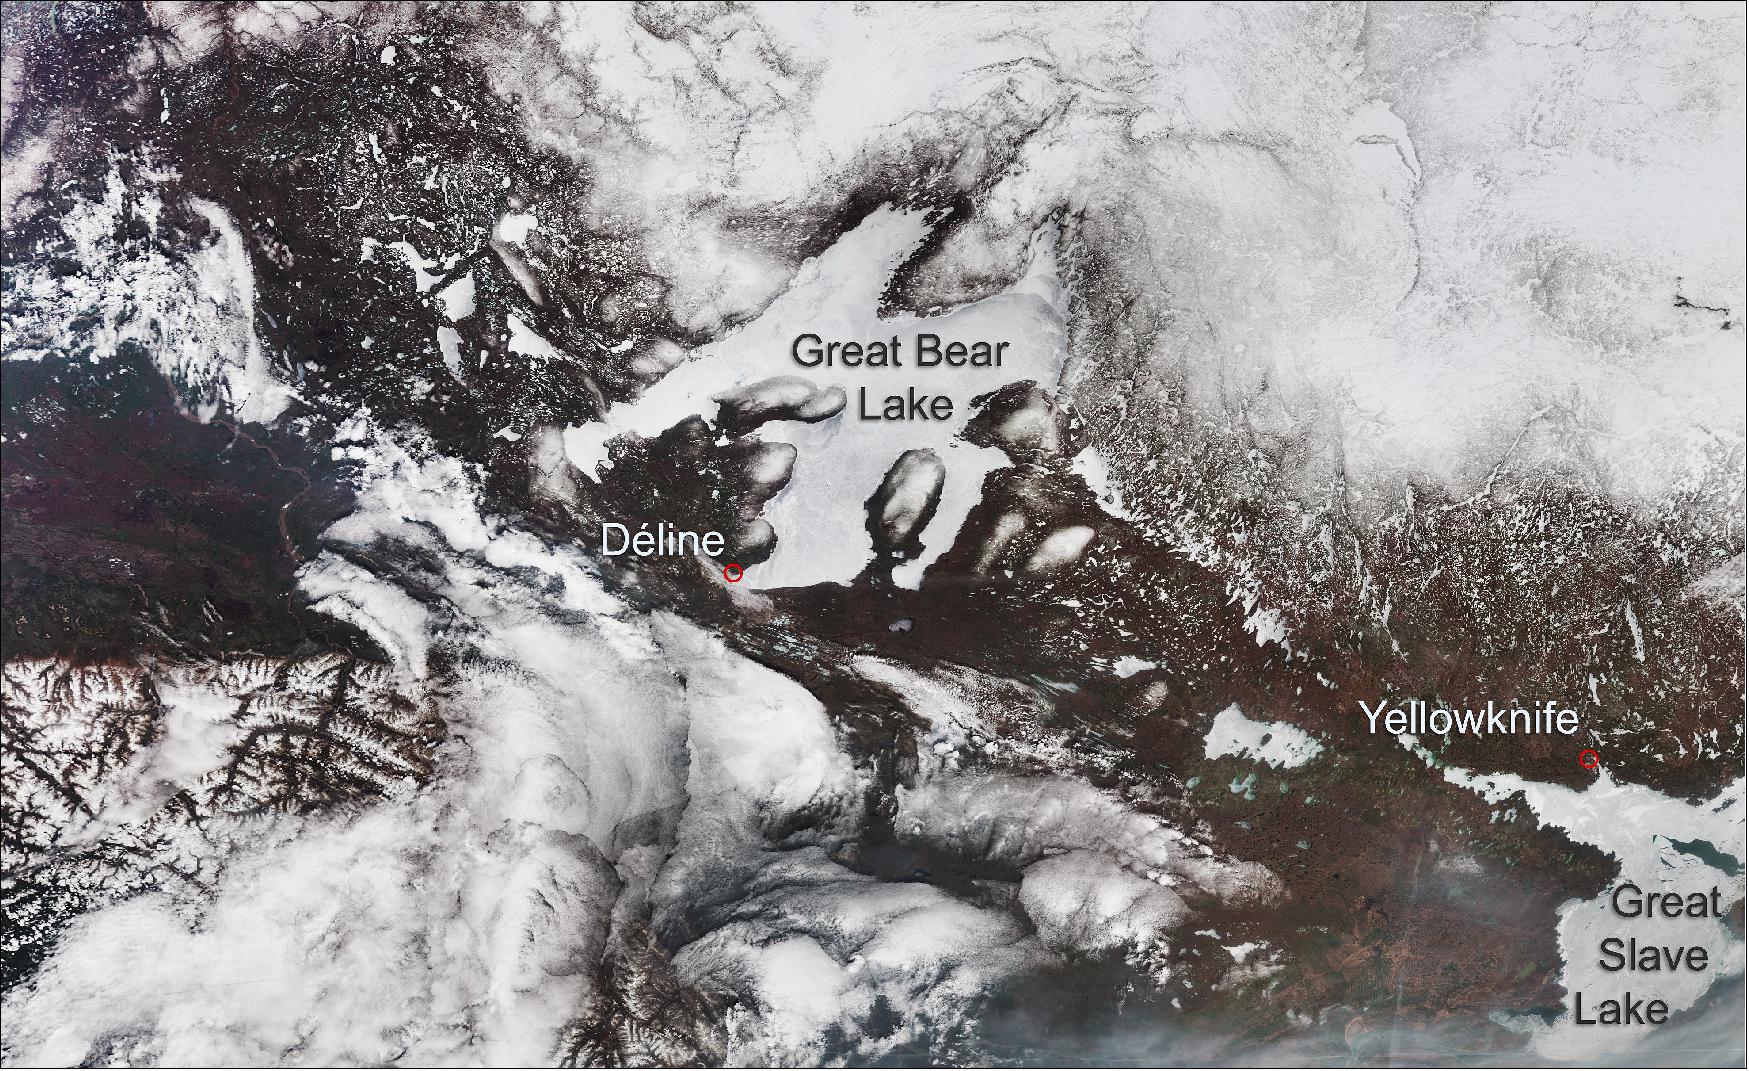 Figure 34: The Great Bear Lake and Great Slave Lake in the Northwest Territory of Canada can be seen from this Copernicus Sentinel-3 image, captured on 21 May 2019 (image credit: ESA, CC BY-SA 3.0 IGO)